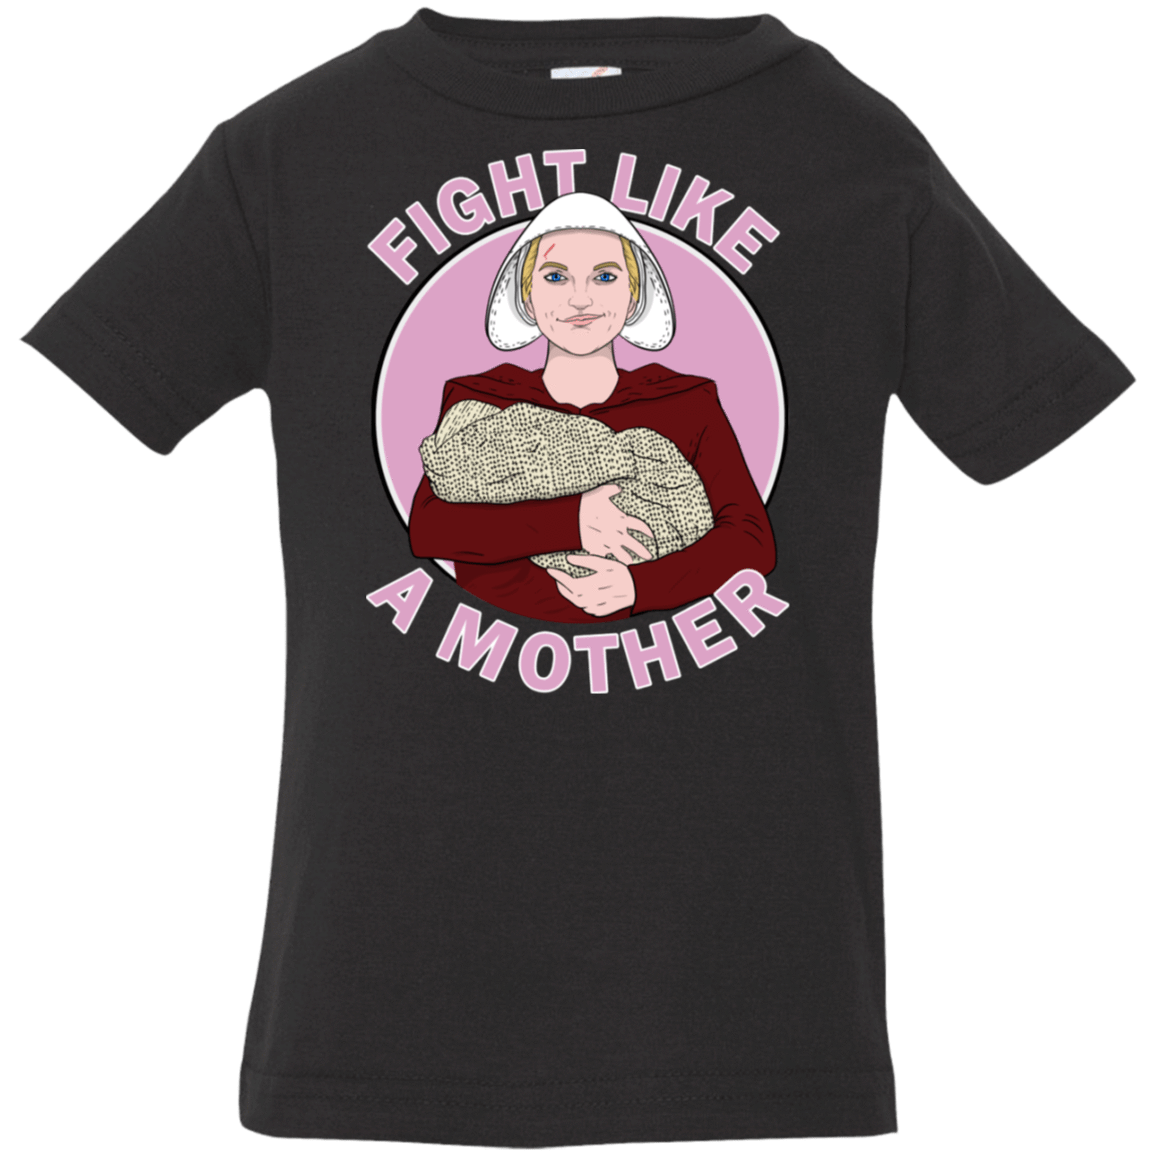 T-Shirts Black / 6 Months Fight Like a Mother Infant Premium T-Shirt